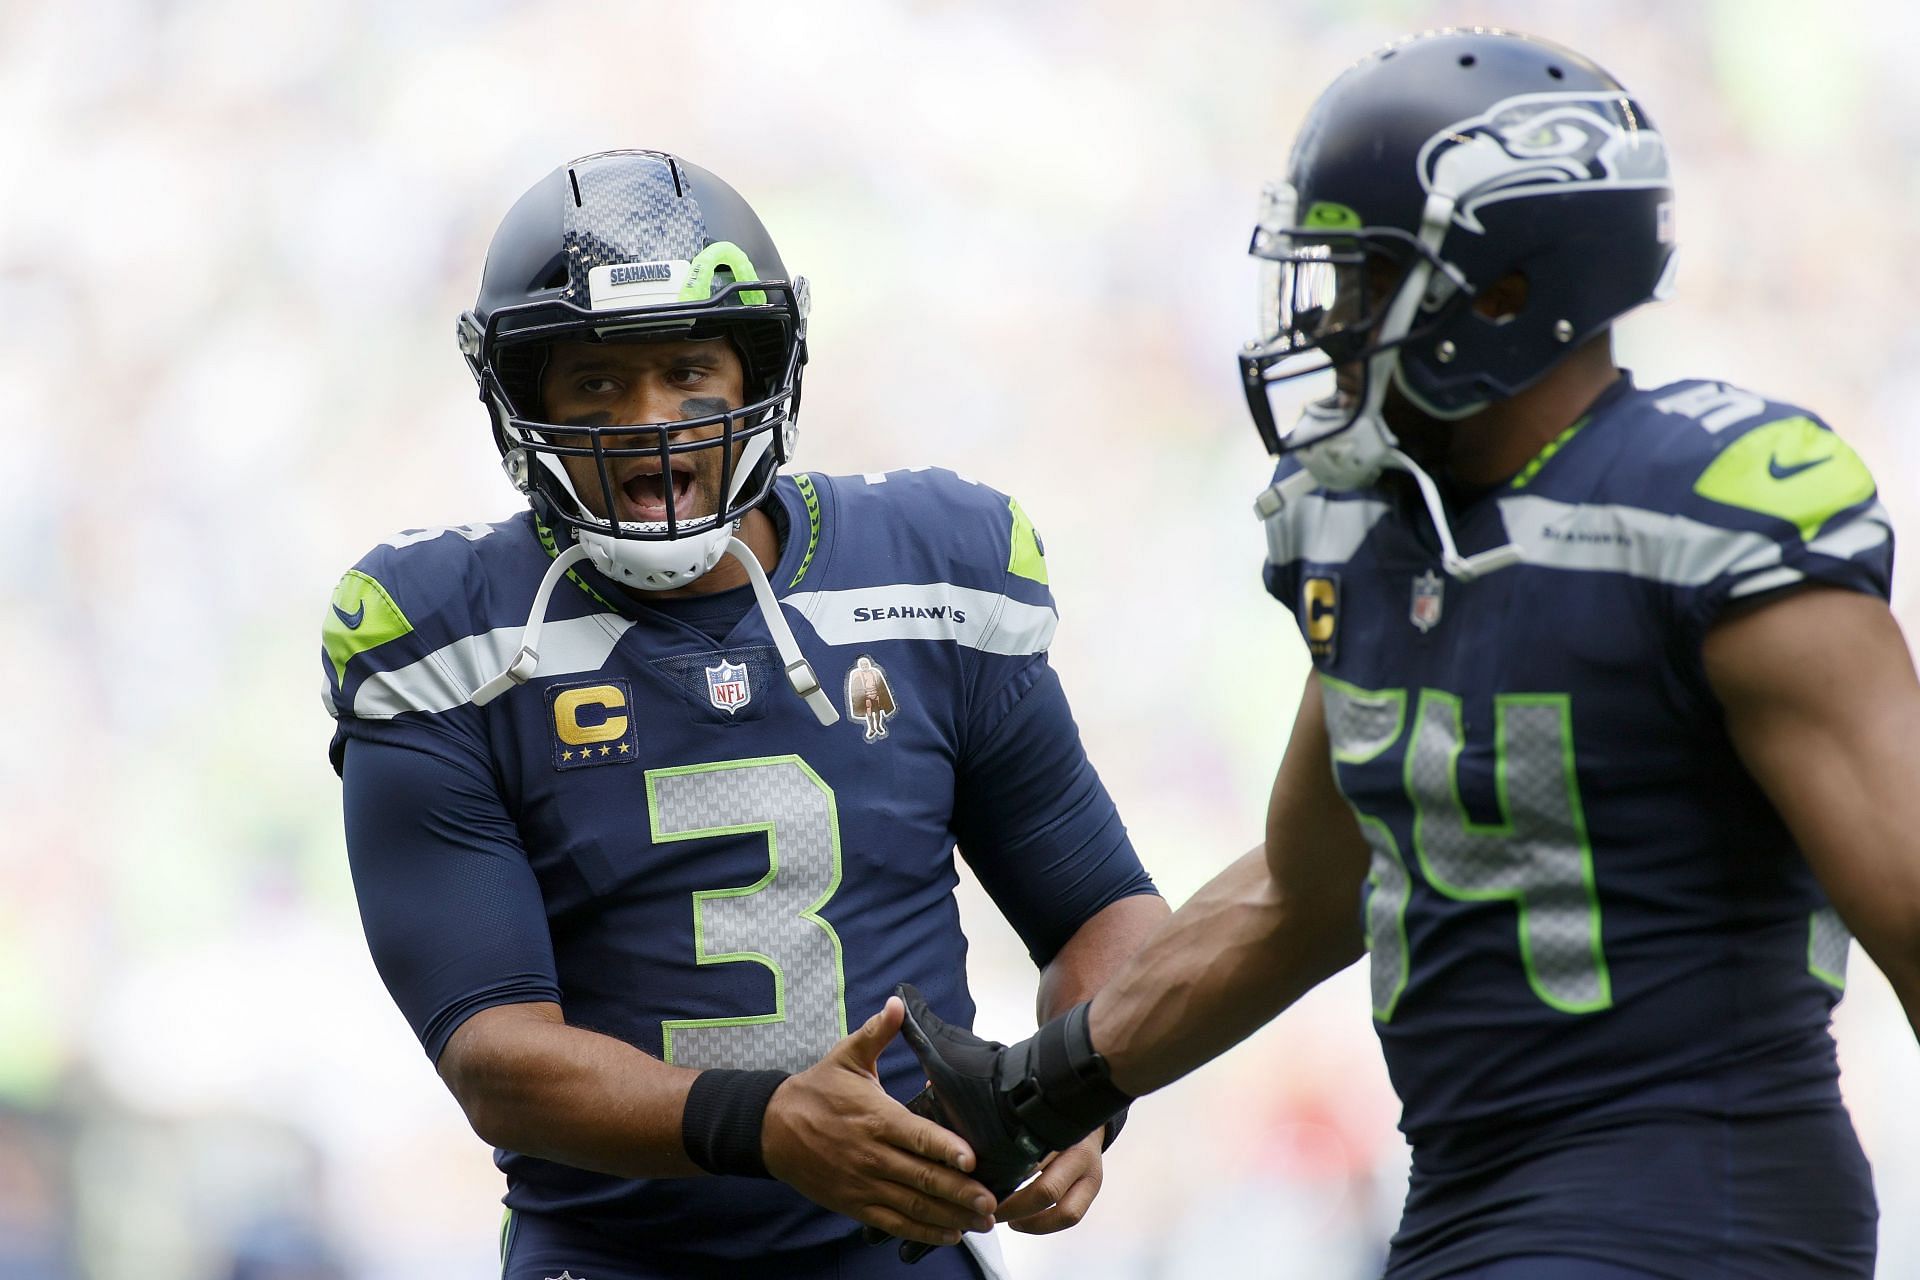 The star pair are no longer members of the Seattle Seahawks